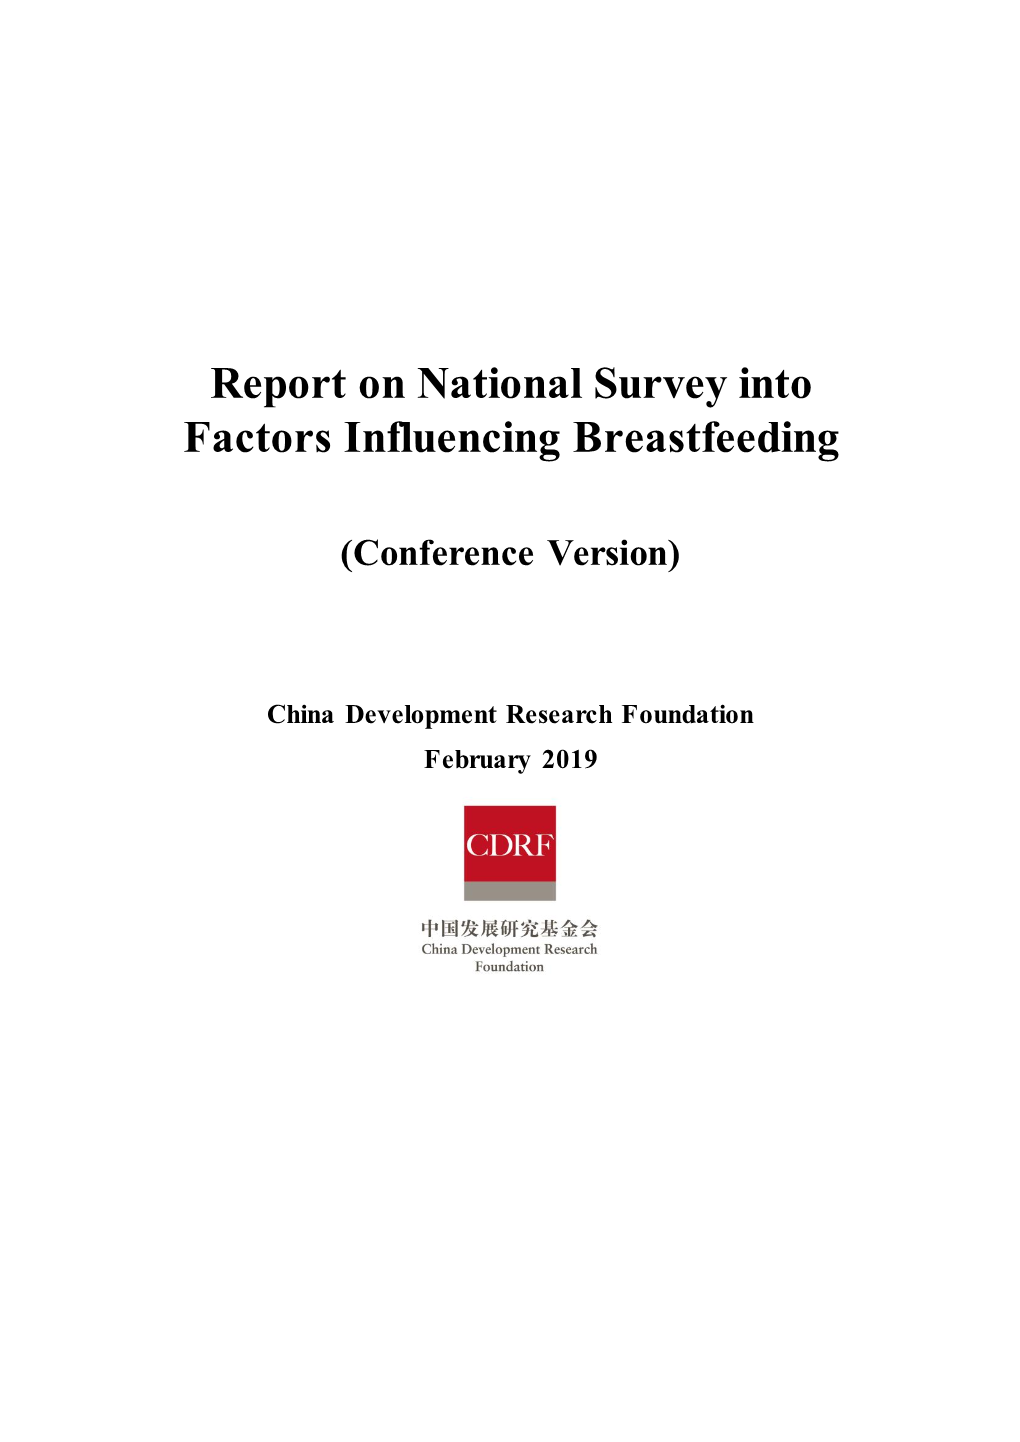 Report on National Survey Into Factors Influencing Breastfeeding